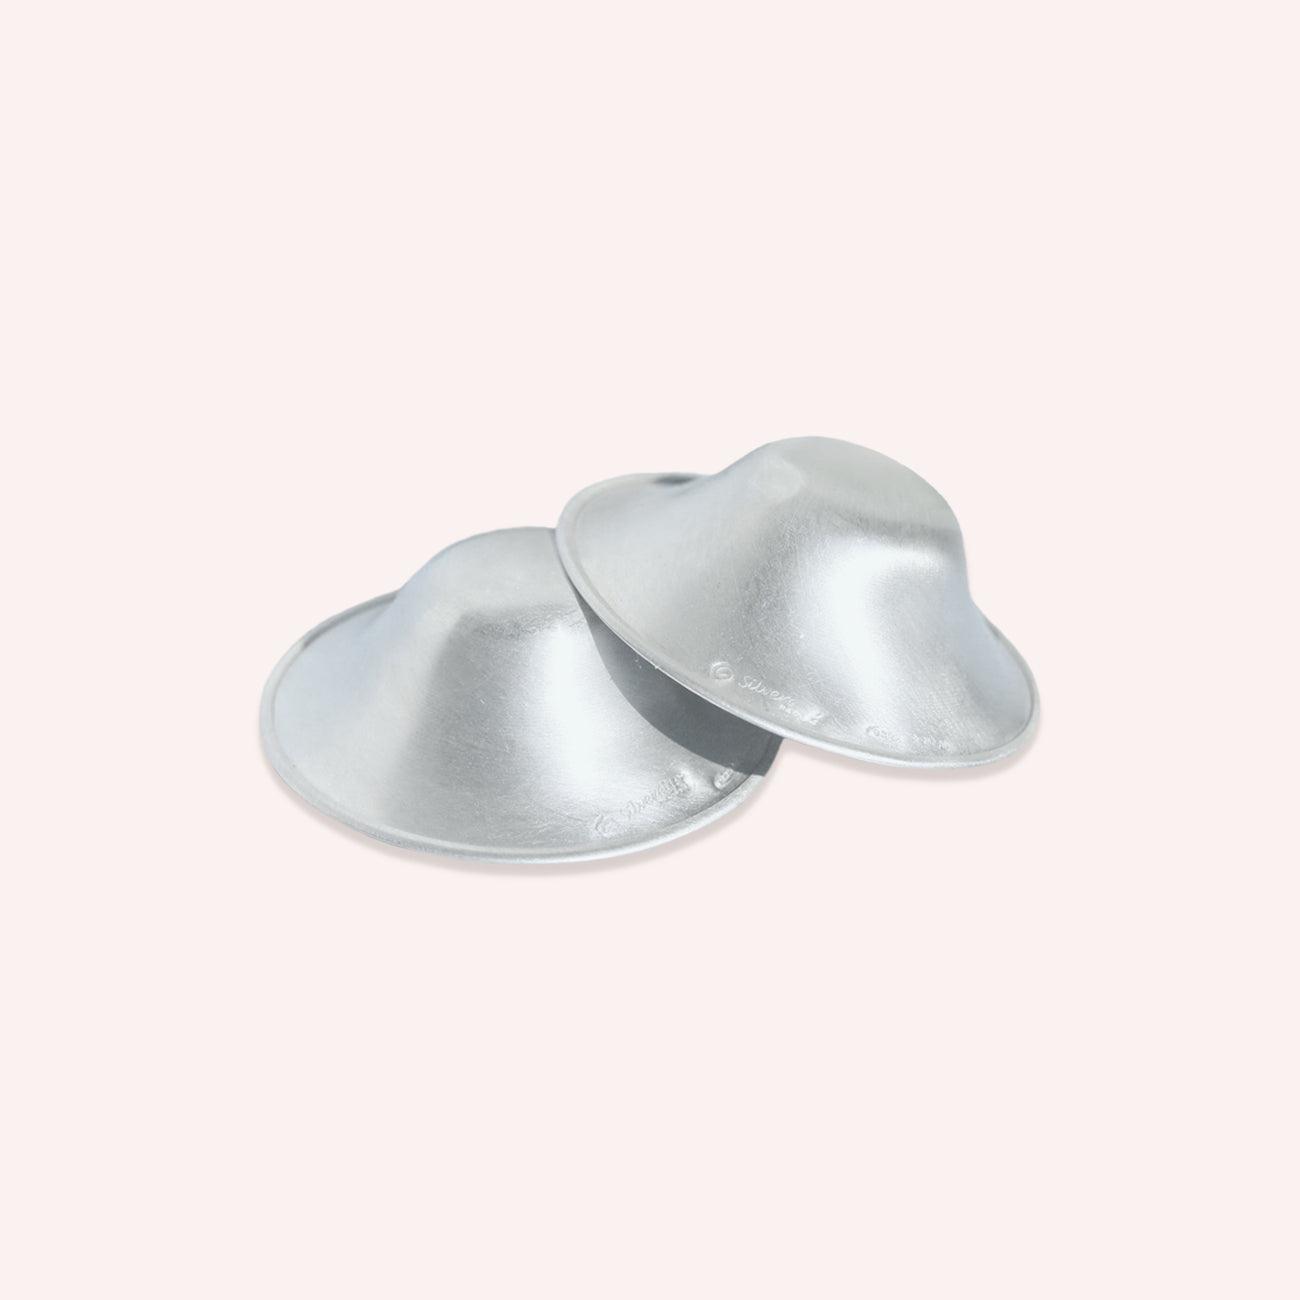 The Original Silver Nursing Cups - Nipple Shields for Nursing Newborn -  Newborn Essentials Must Haves - Soothe and Protect Your Nursing Nipples -  925